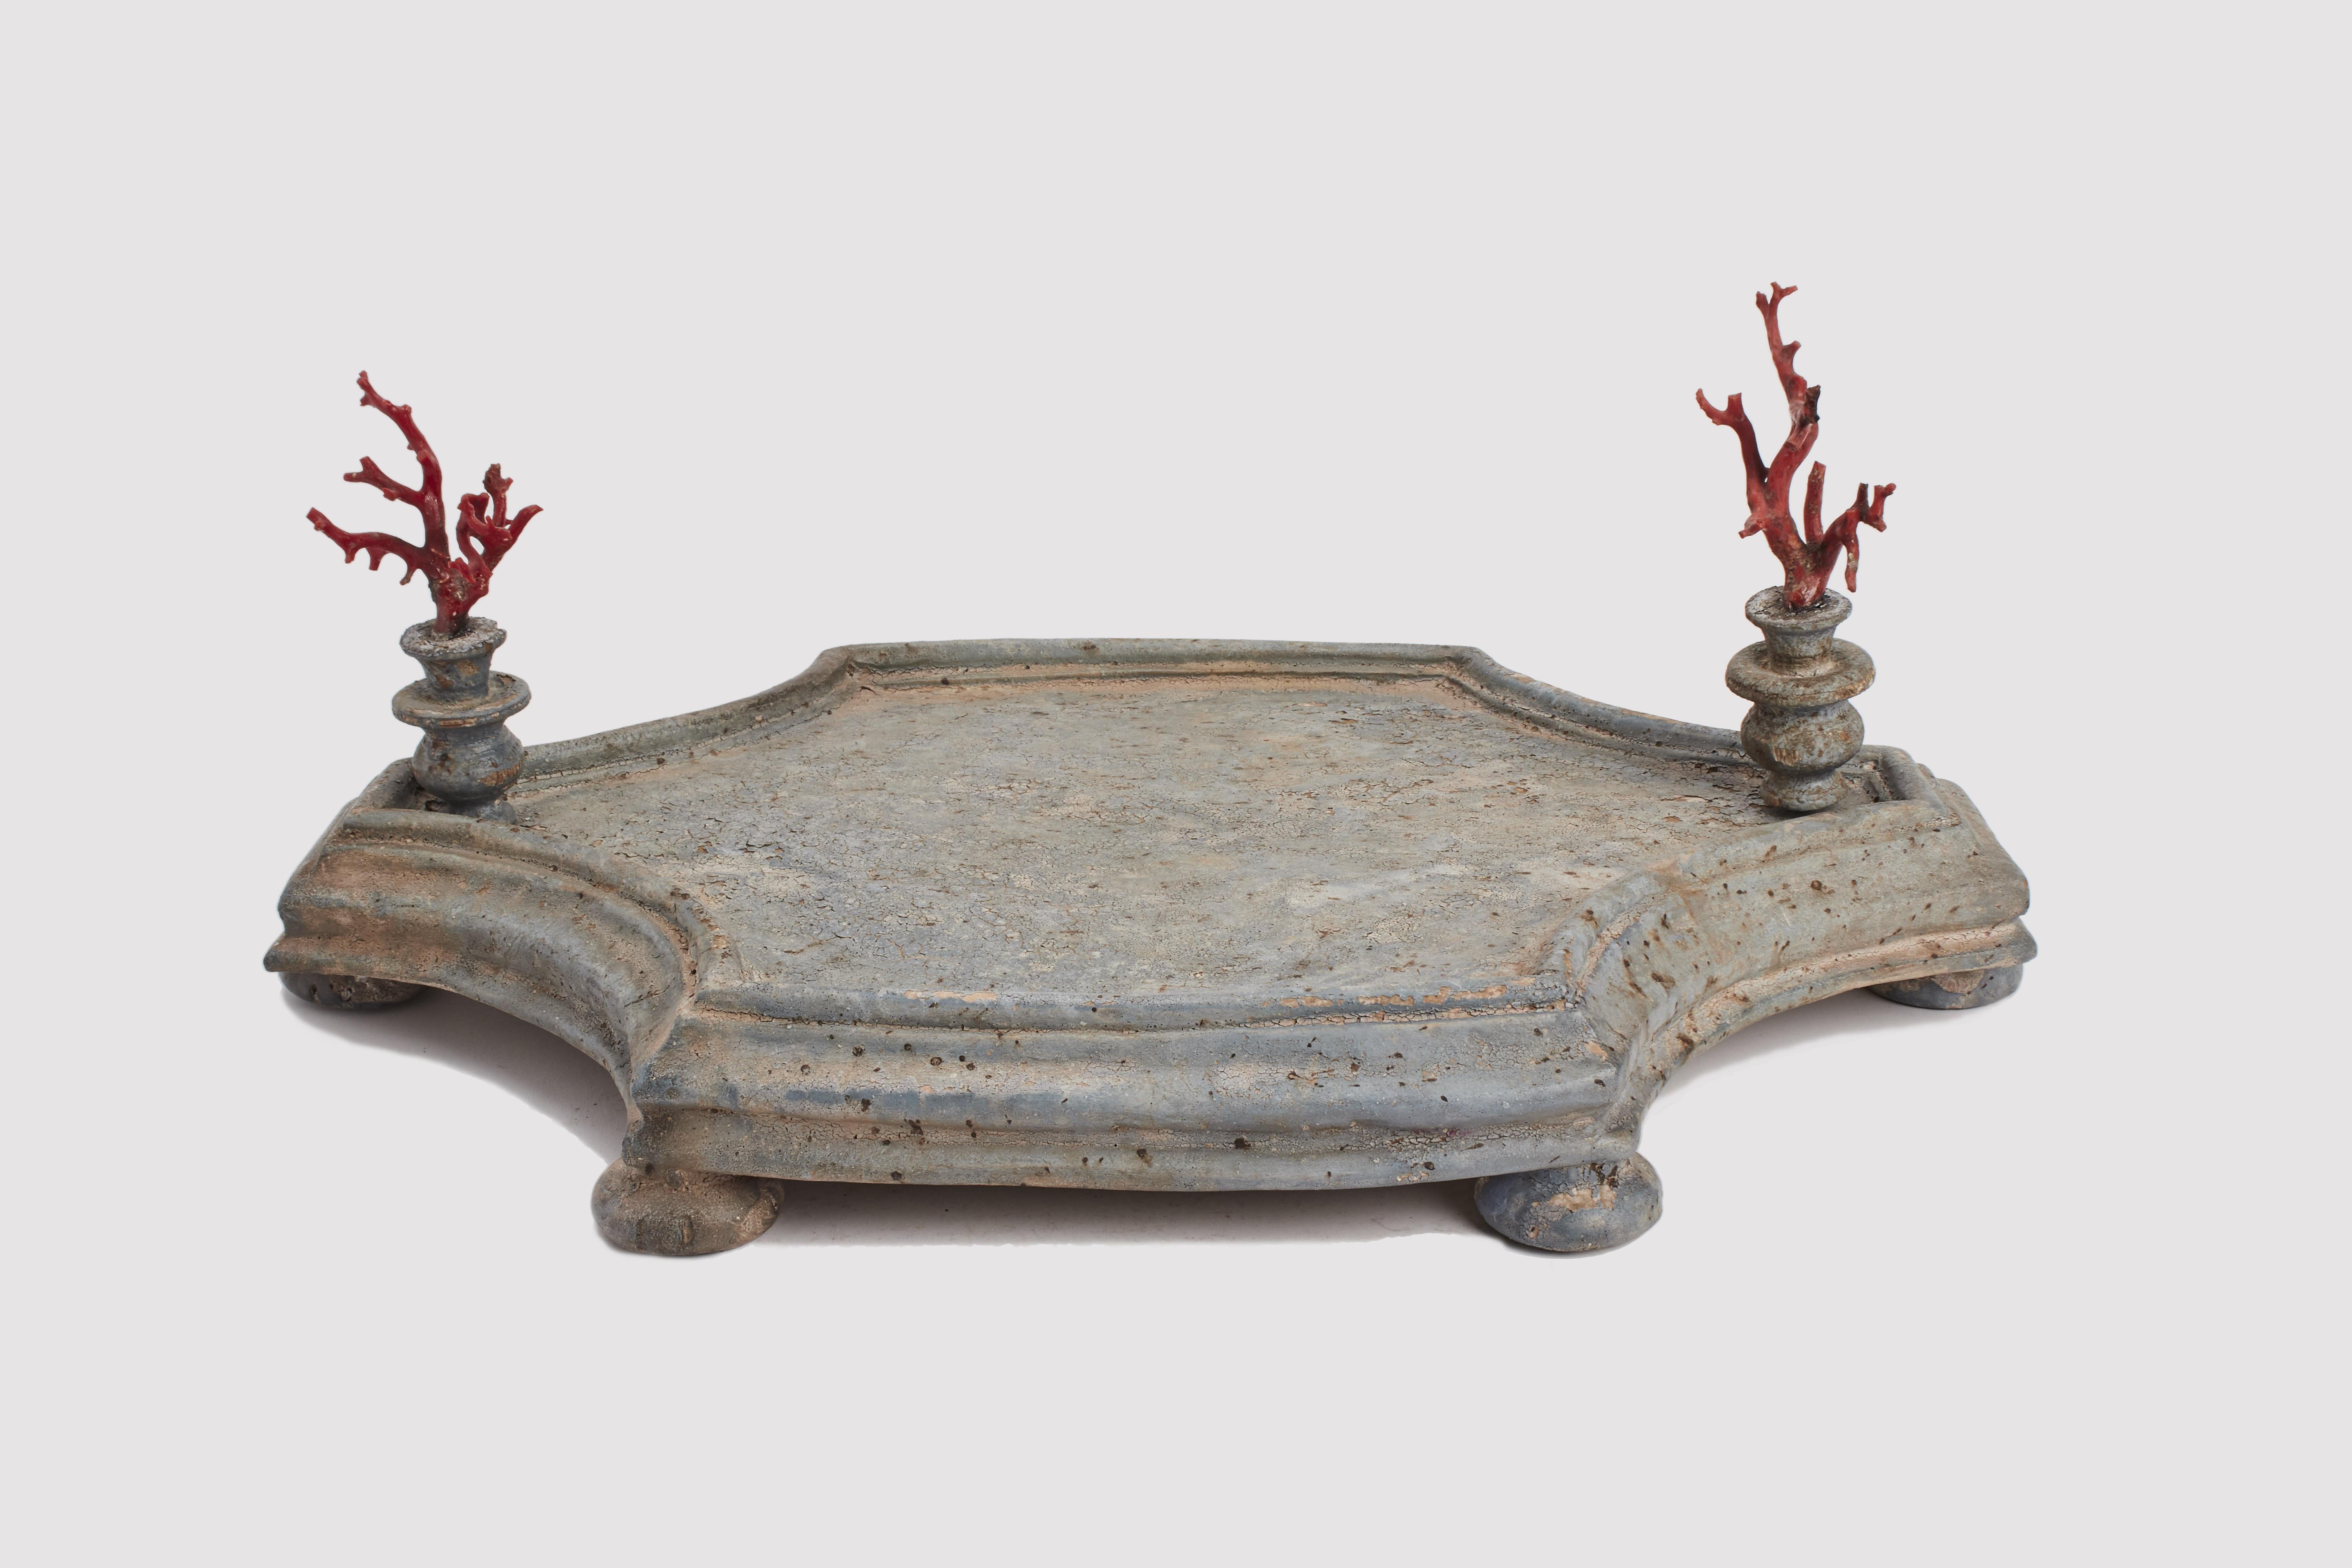 A pair of wunderkammer trays with two red Mediterranean coral branches (Rubrum Corallium) each. Octagonal shape with four concave corners. Italy 1830 ca.